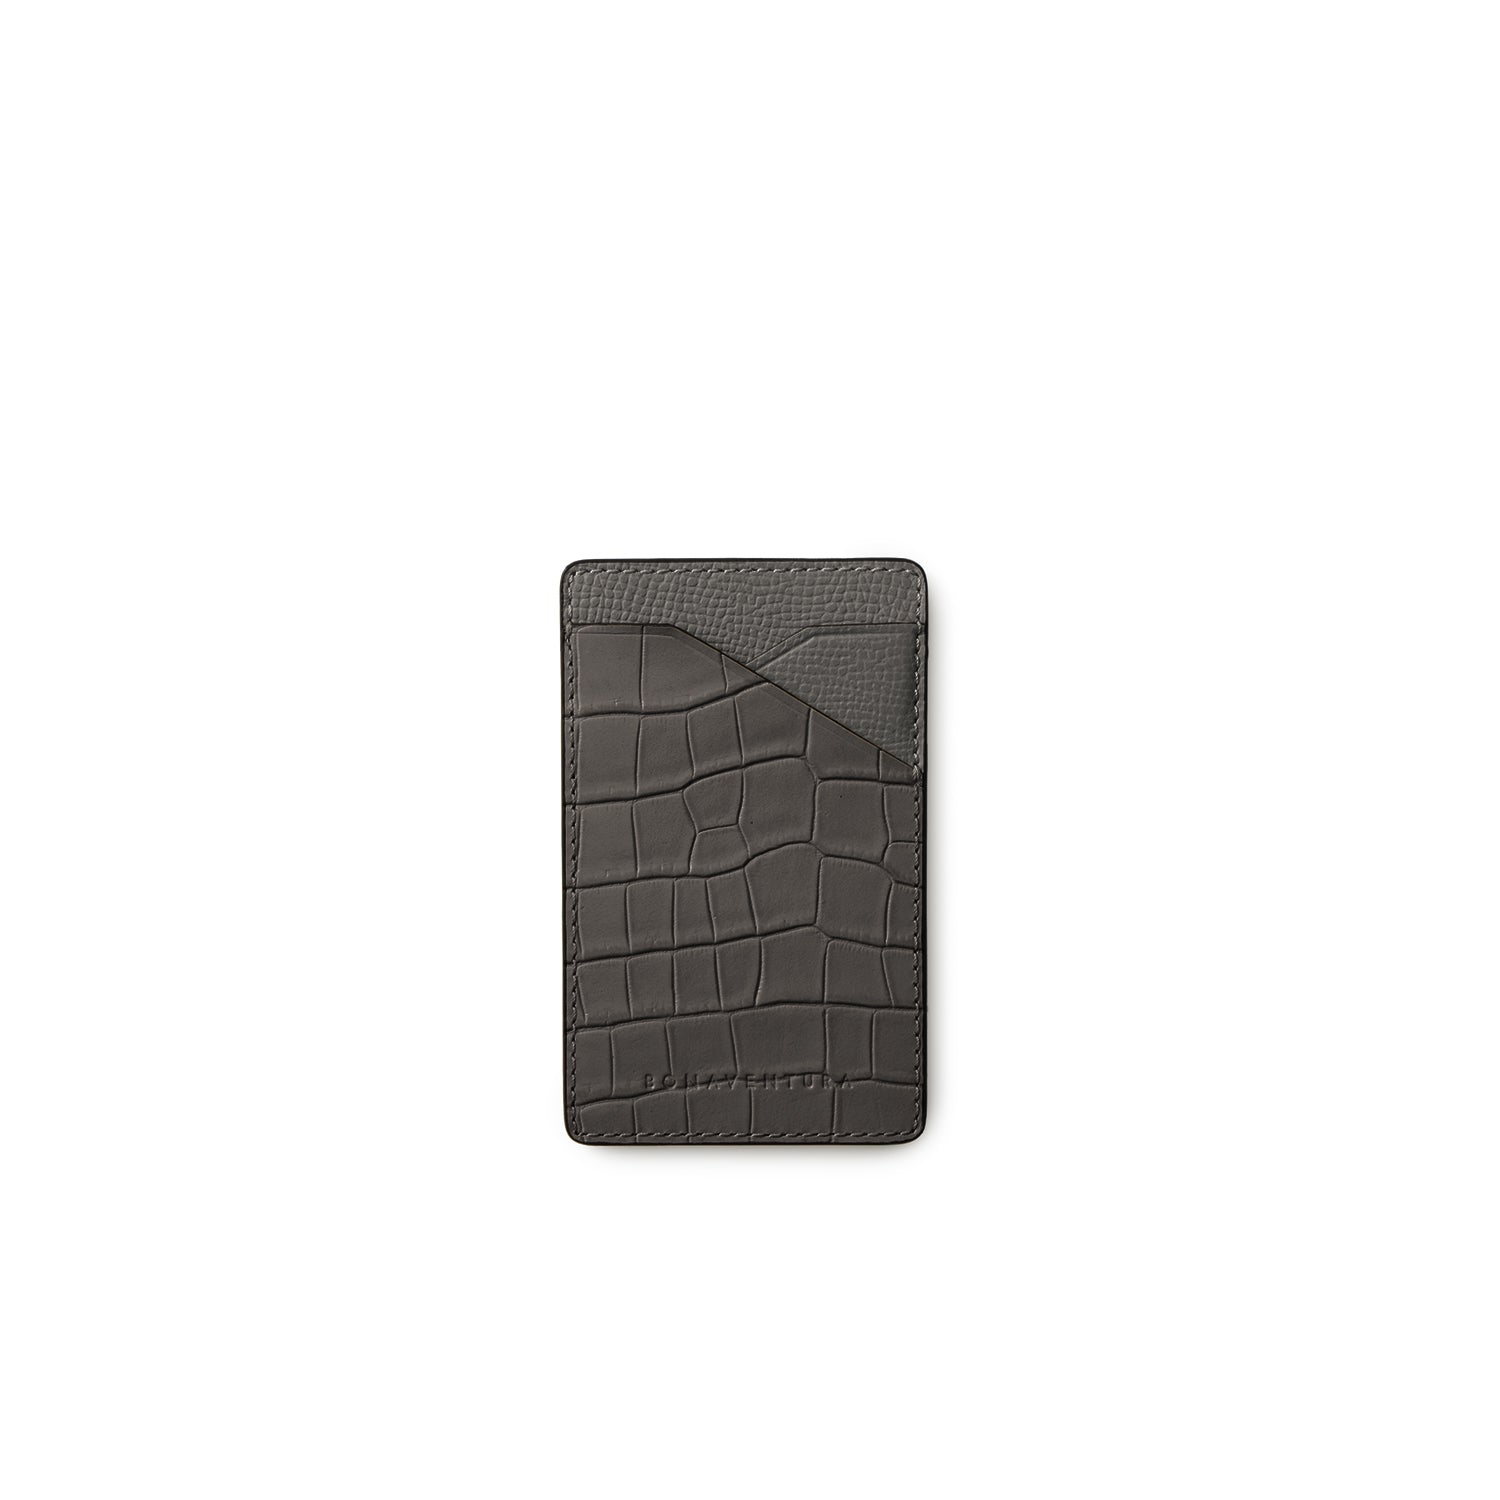 Detachable card slot in Noblesse x embossed crocodile leather